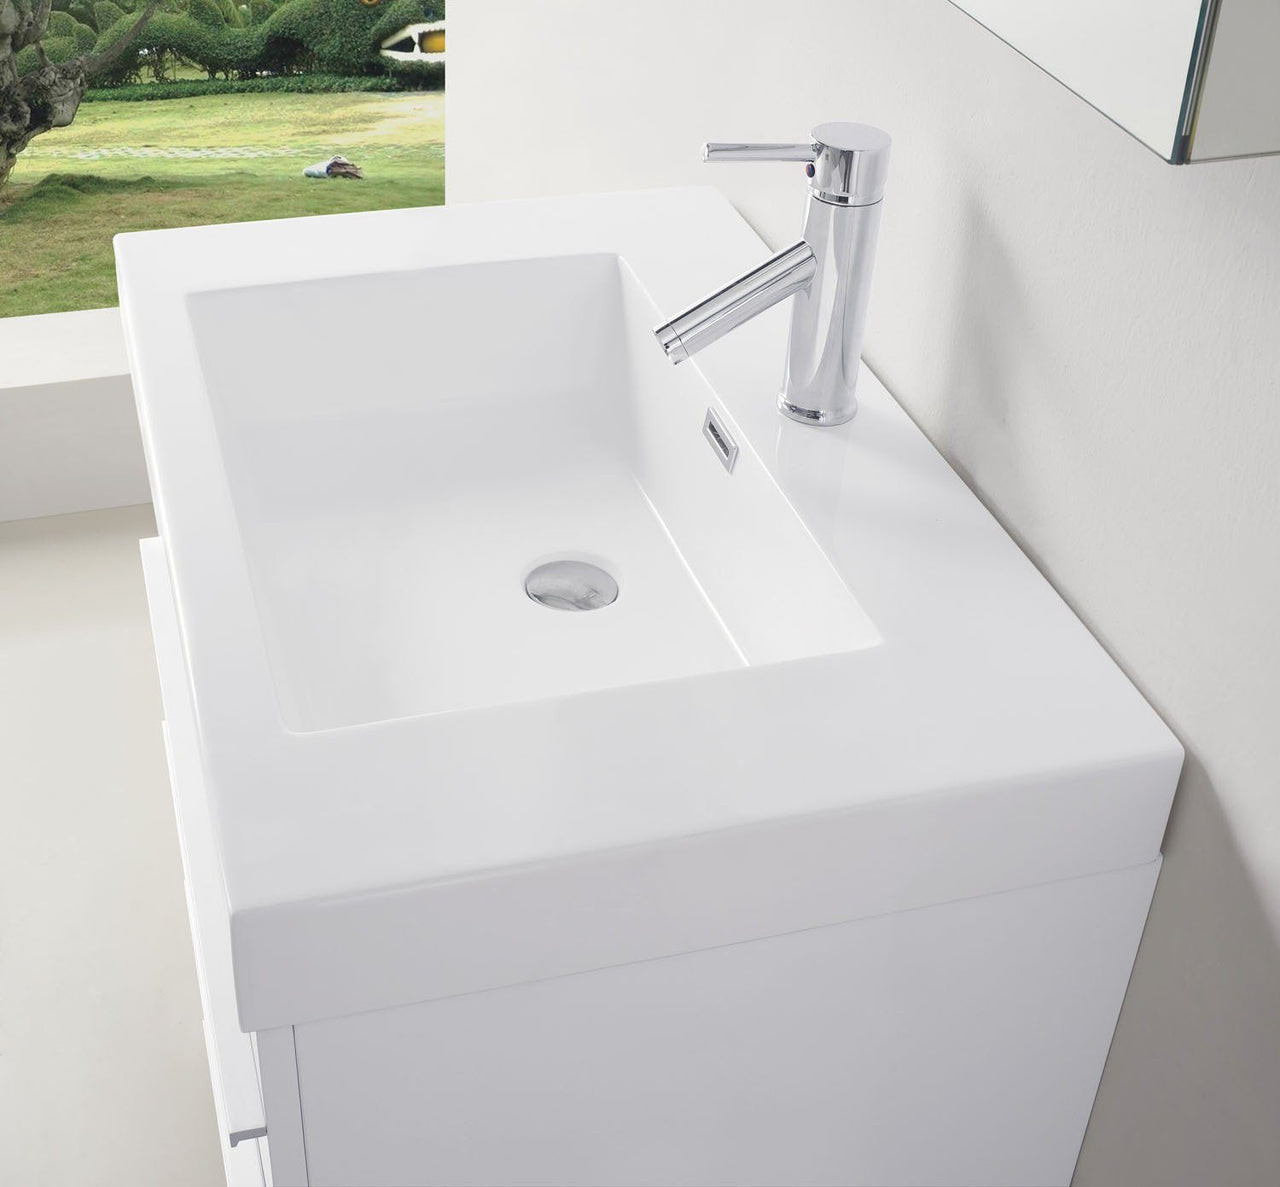 Virtu USA Bailey 30" Single Square Sink Gloss White Top Vanity in Gloss White with Polished Chrome Faucet and Mirror Vanity Virtu USA 